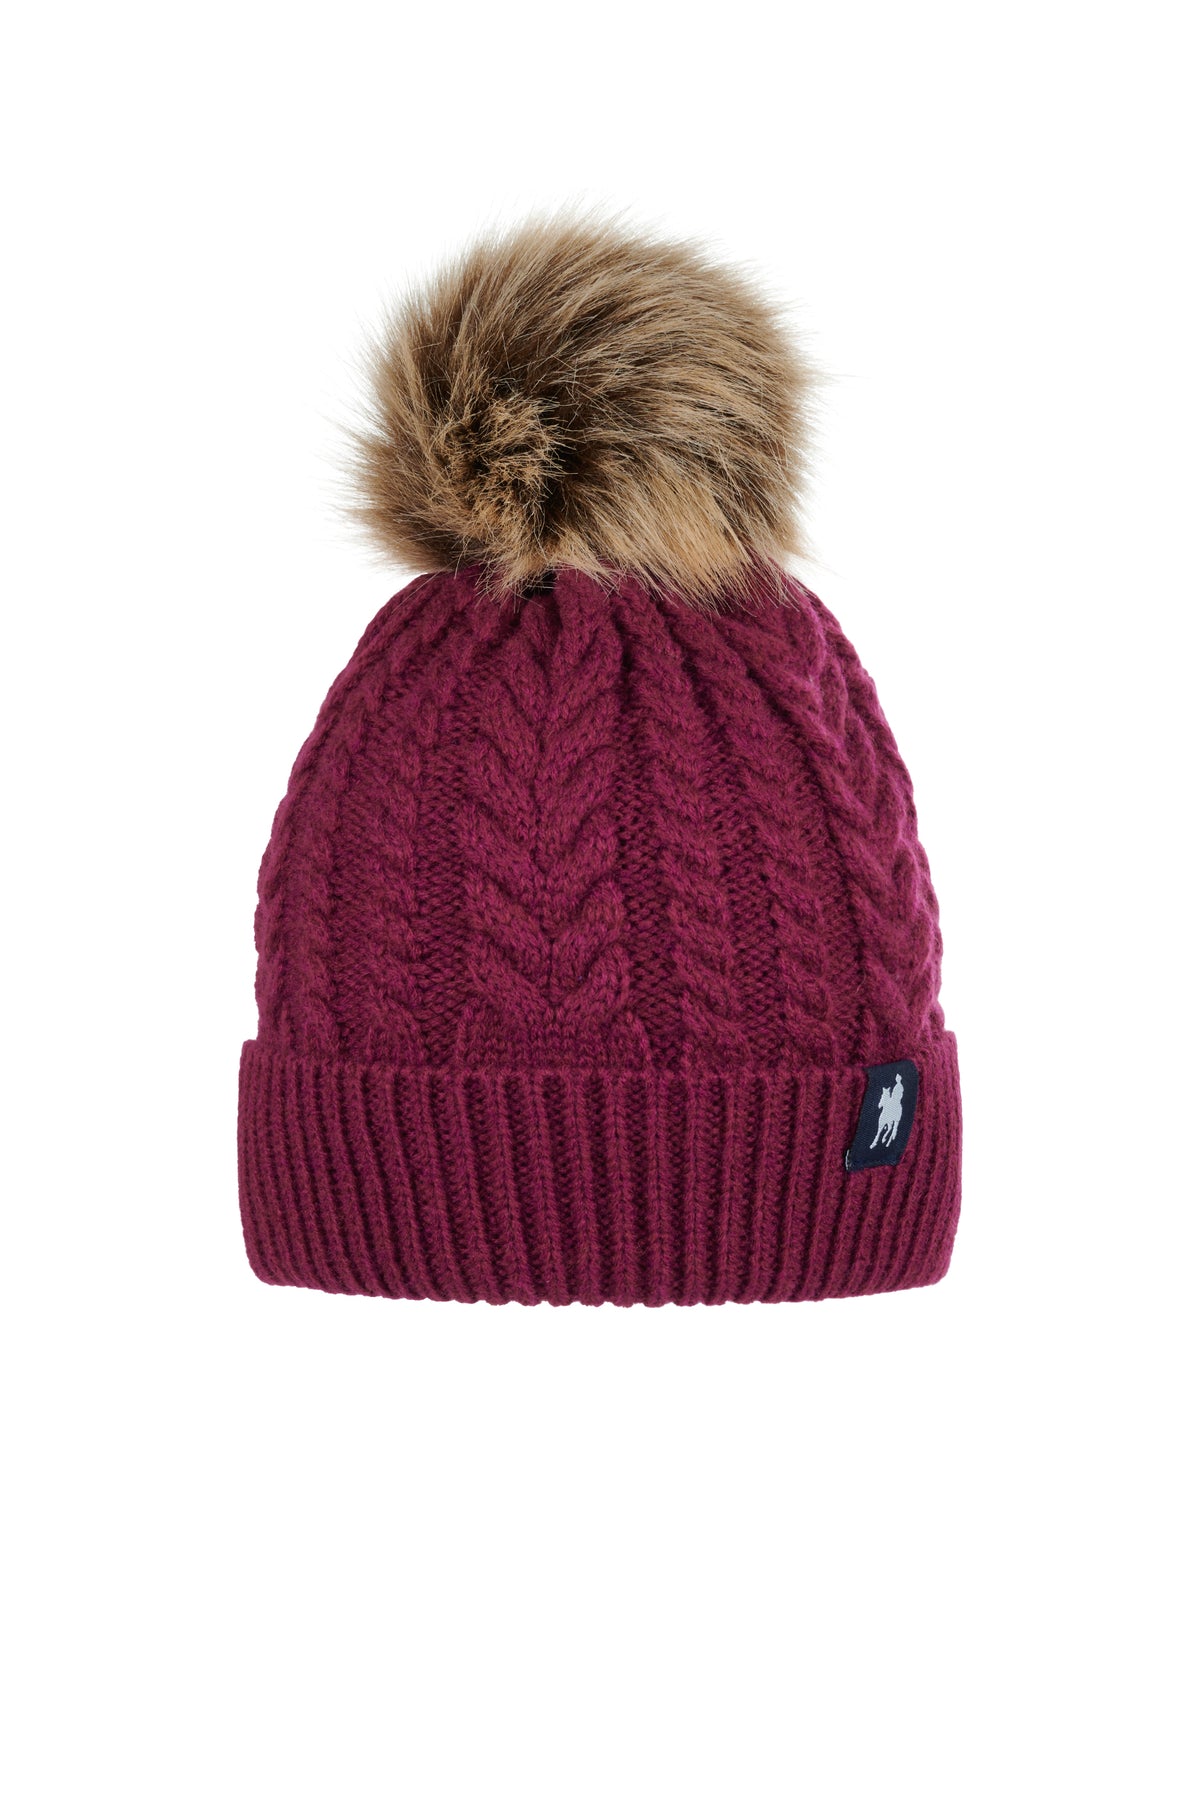 Thomas Cook Taylah Beanie - Mulberry